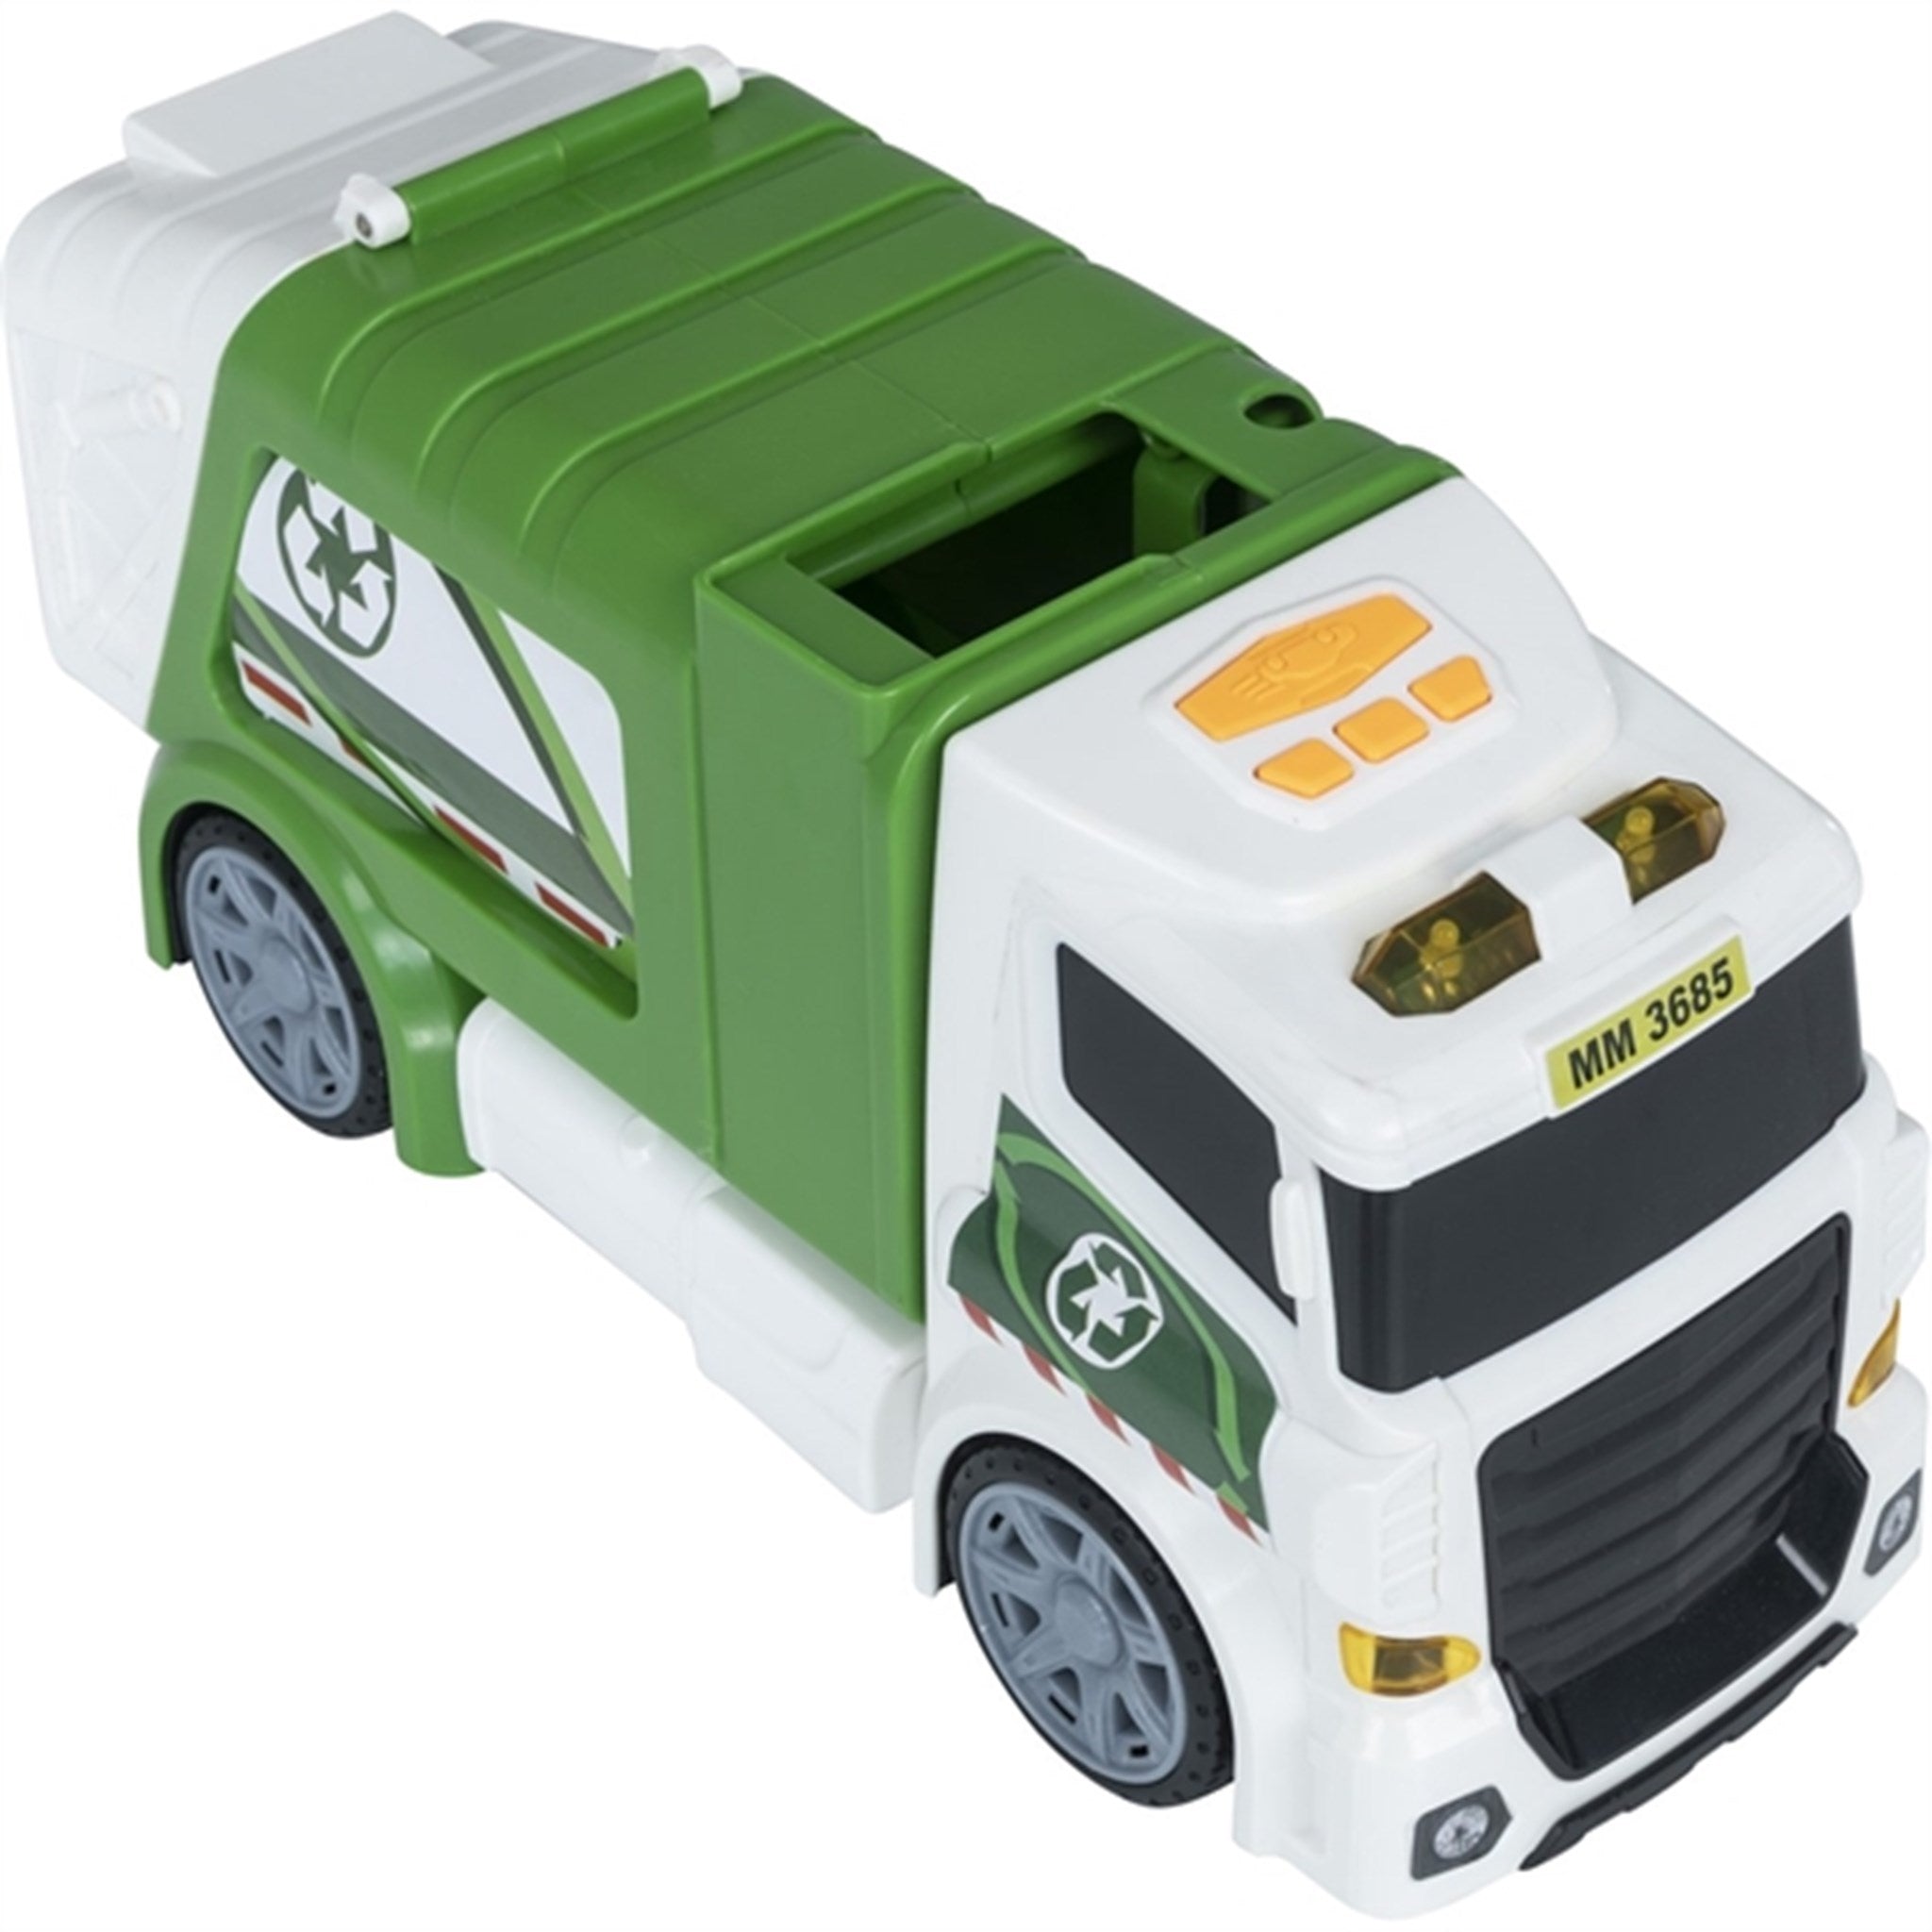 Teamsterz Mighty Moverz Garbage Truck 7